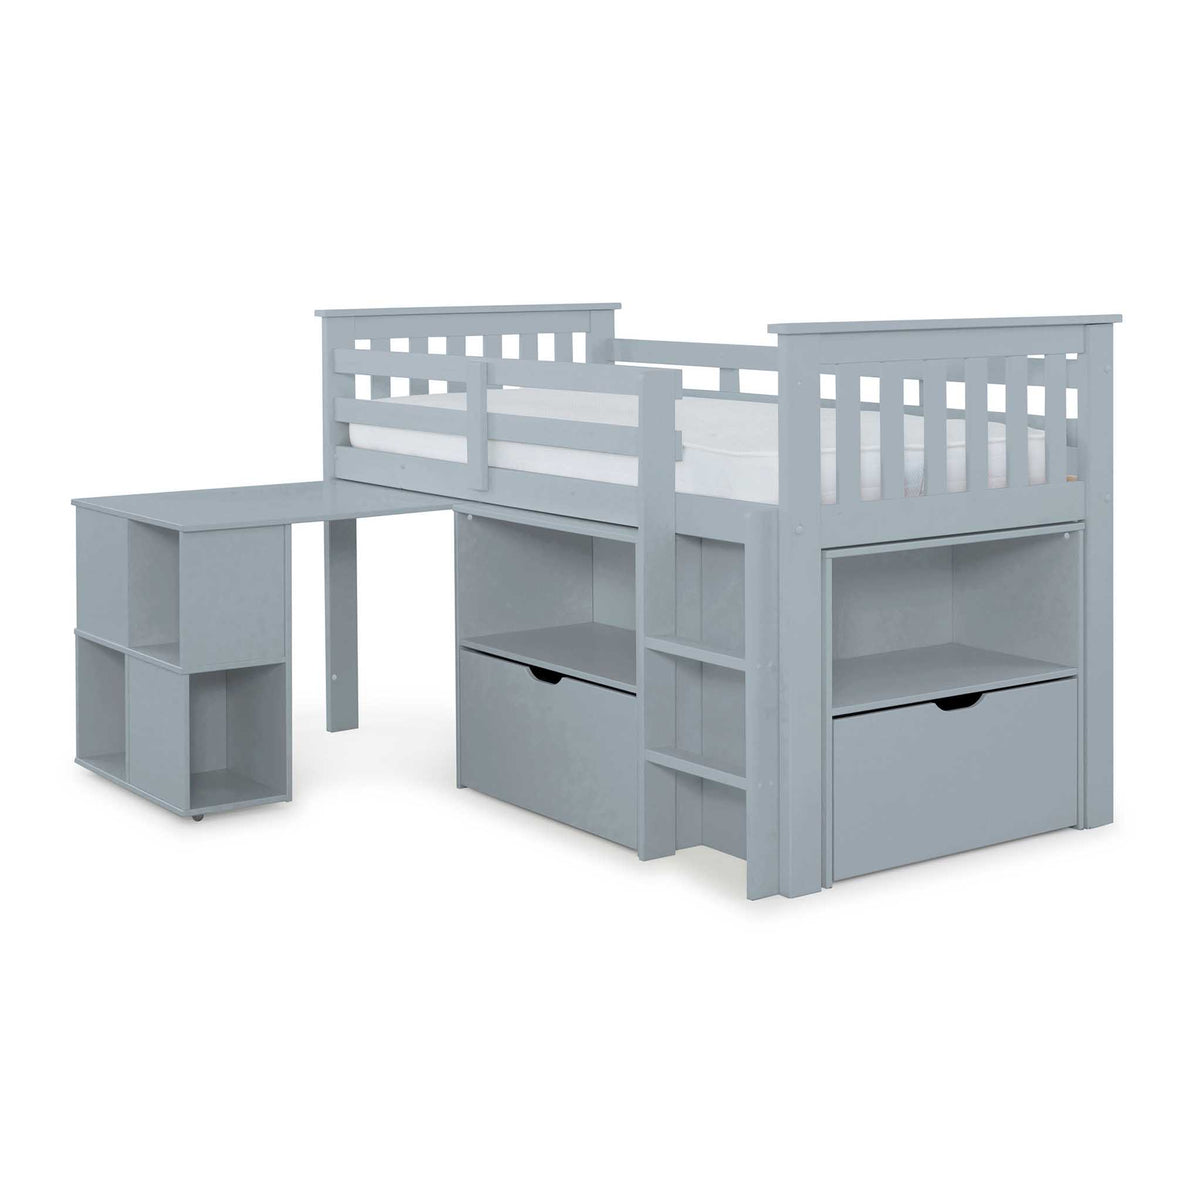 Huckerby Grey Childrens Sleep Station Storage Bed with pull out desk